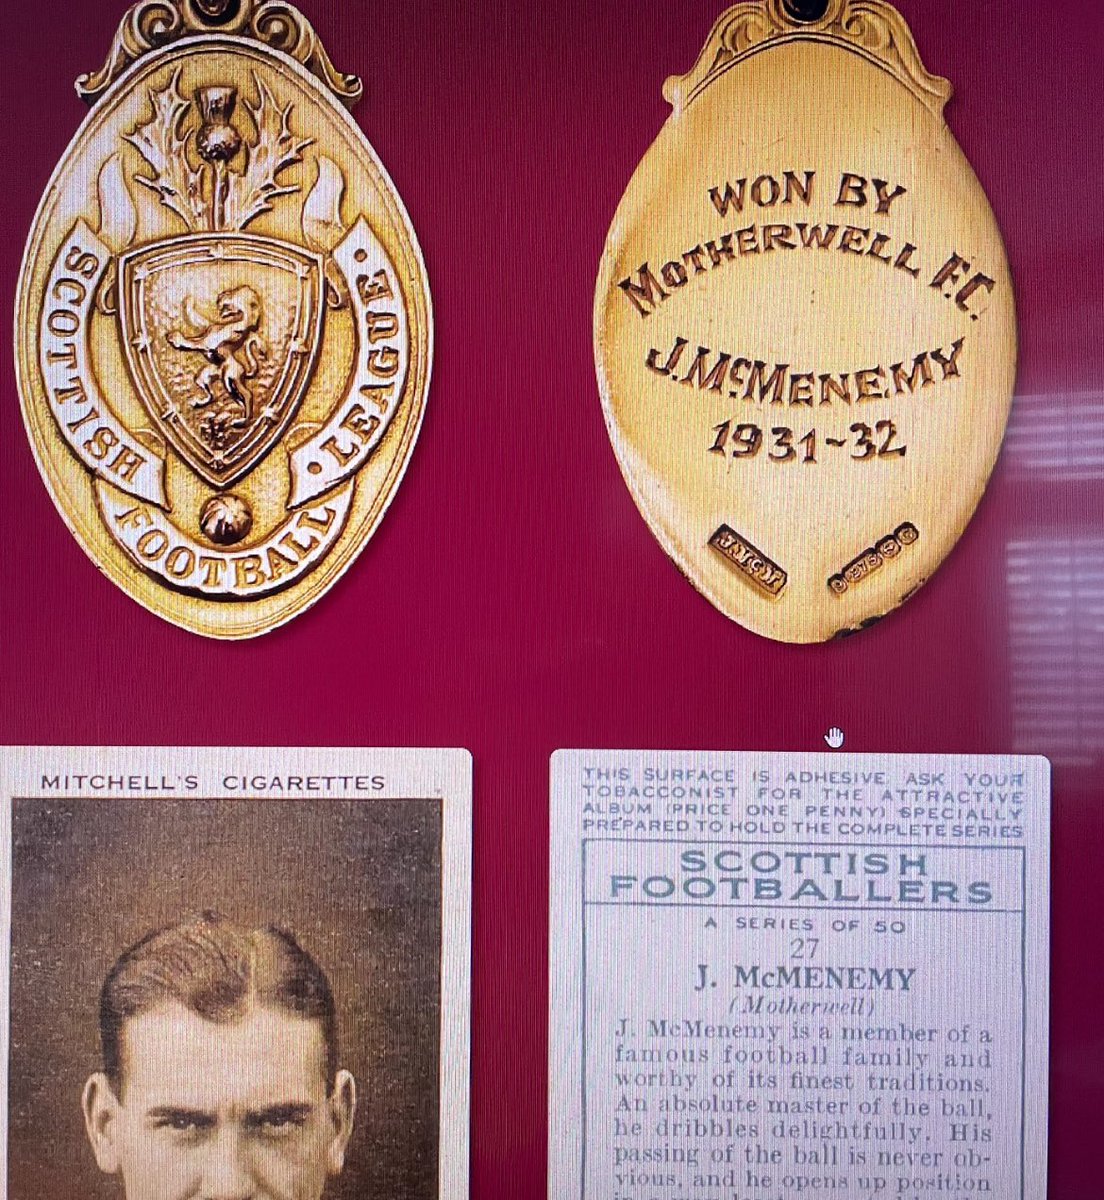 Sadly Motherwell fans this beauty & important piece of MFC history, 1931-32 League Championship medal, 1 of only 20 issued, will no longer be on display in the boardroom. Unfortunately it’s being returned to the owner on Friday. Pity we can’t afford to buy it 😔 #heritagematters